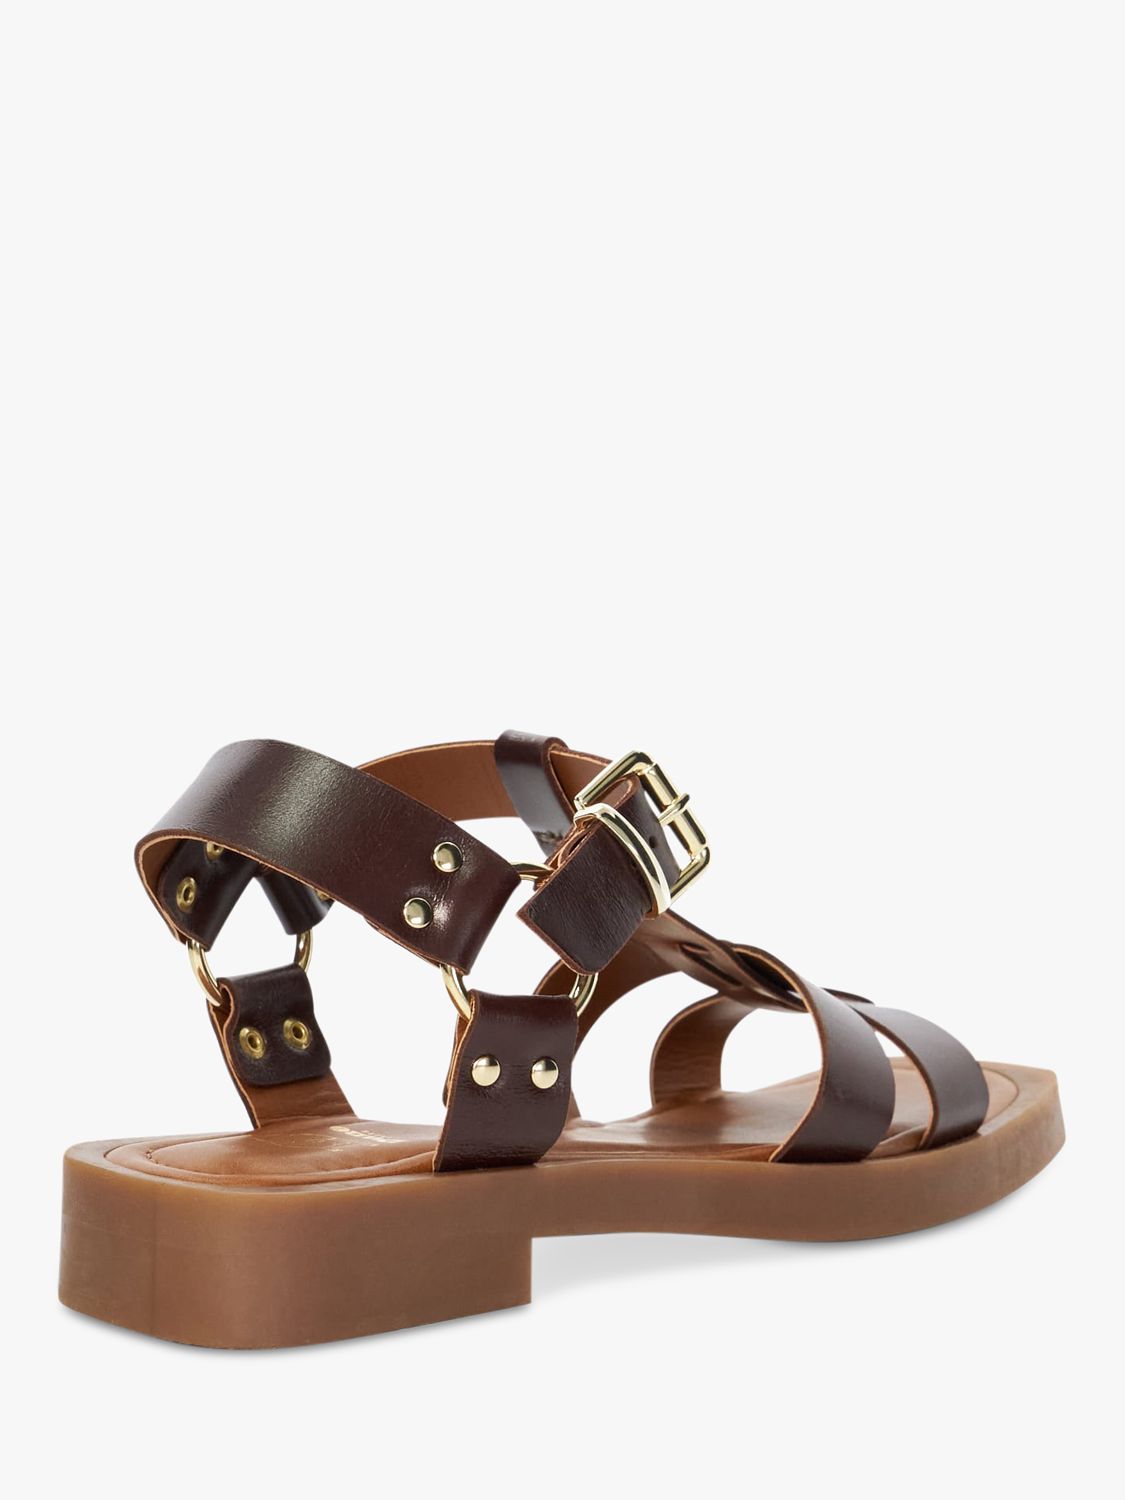 Buy Dune Loto Leather Square Toe Sandals Online at johnlewis.com